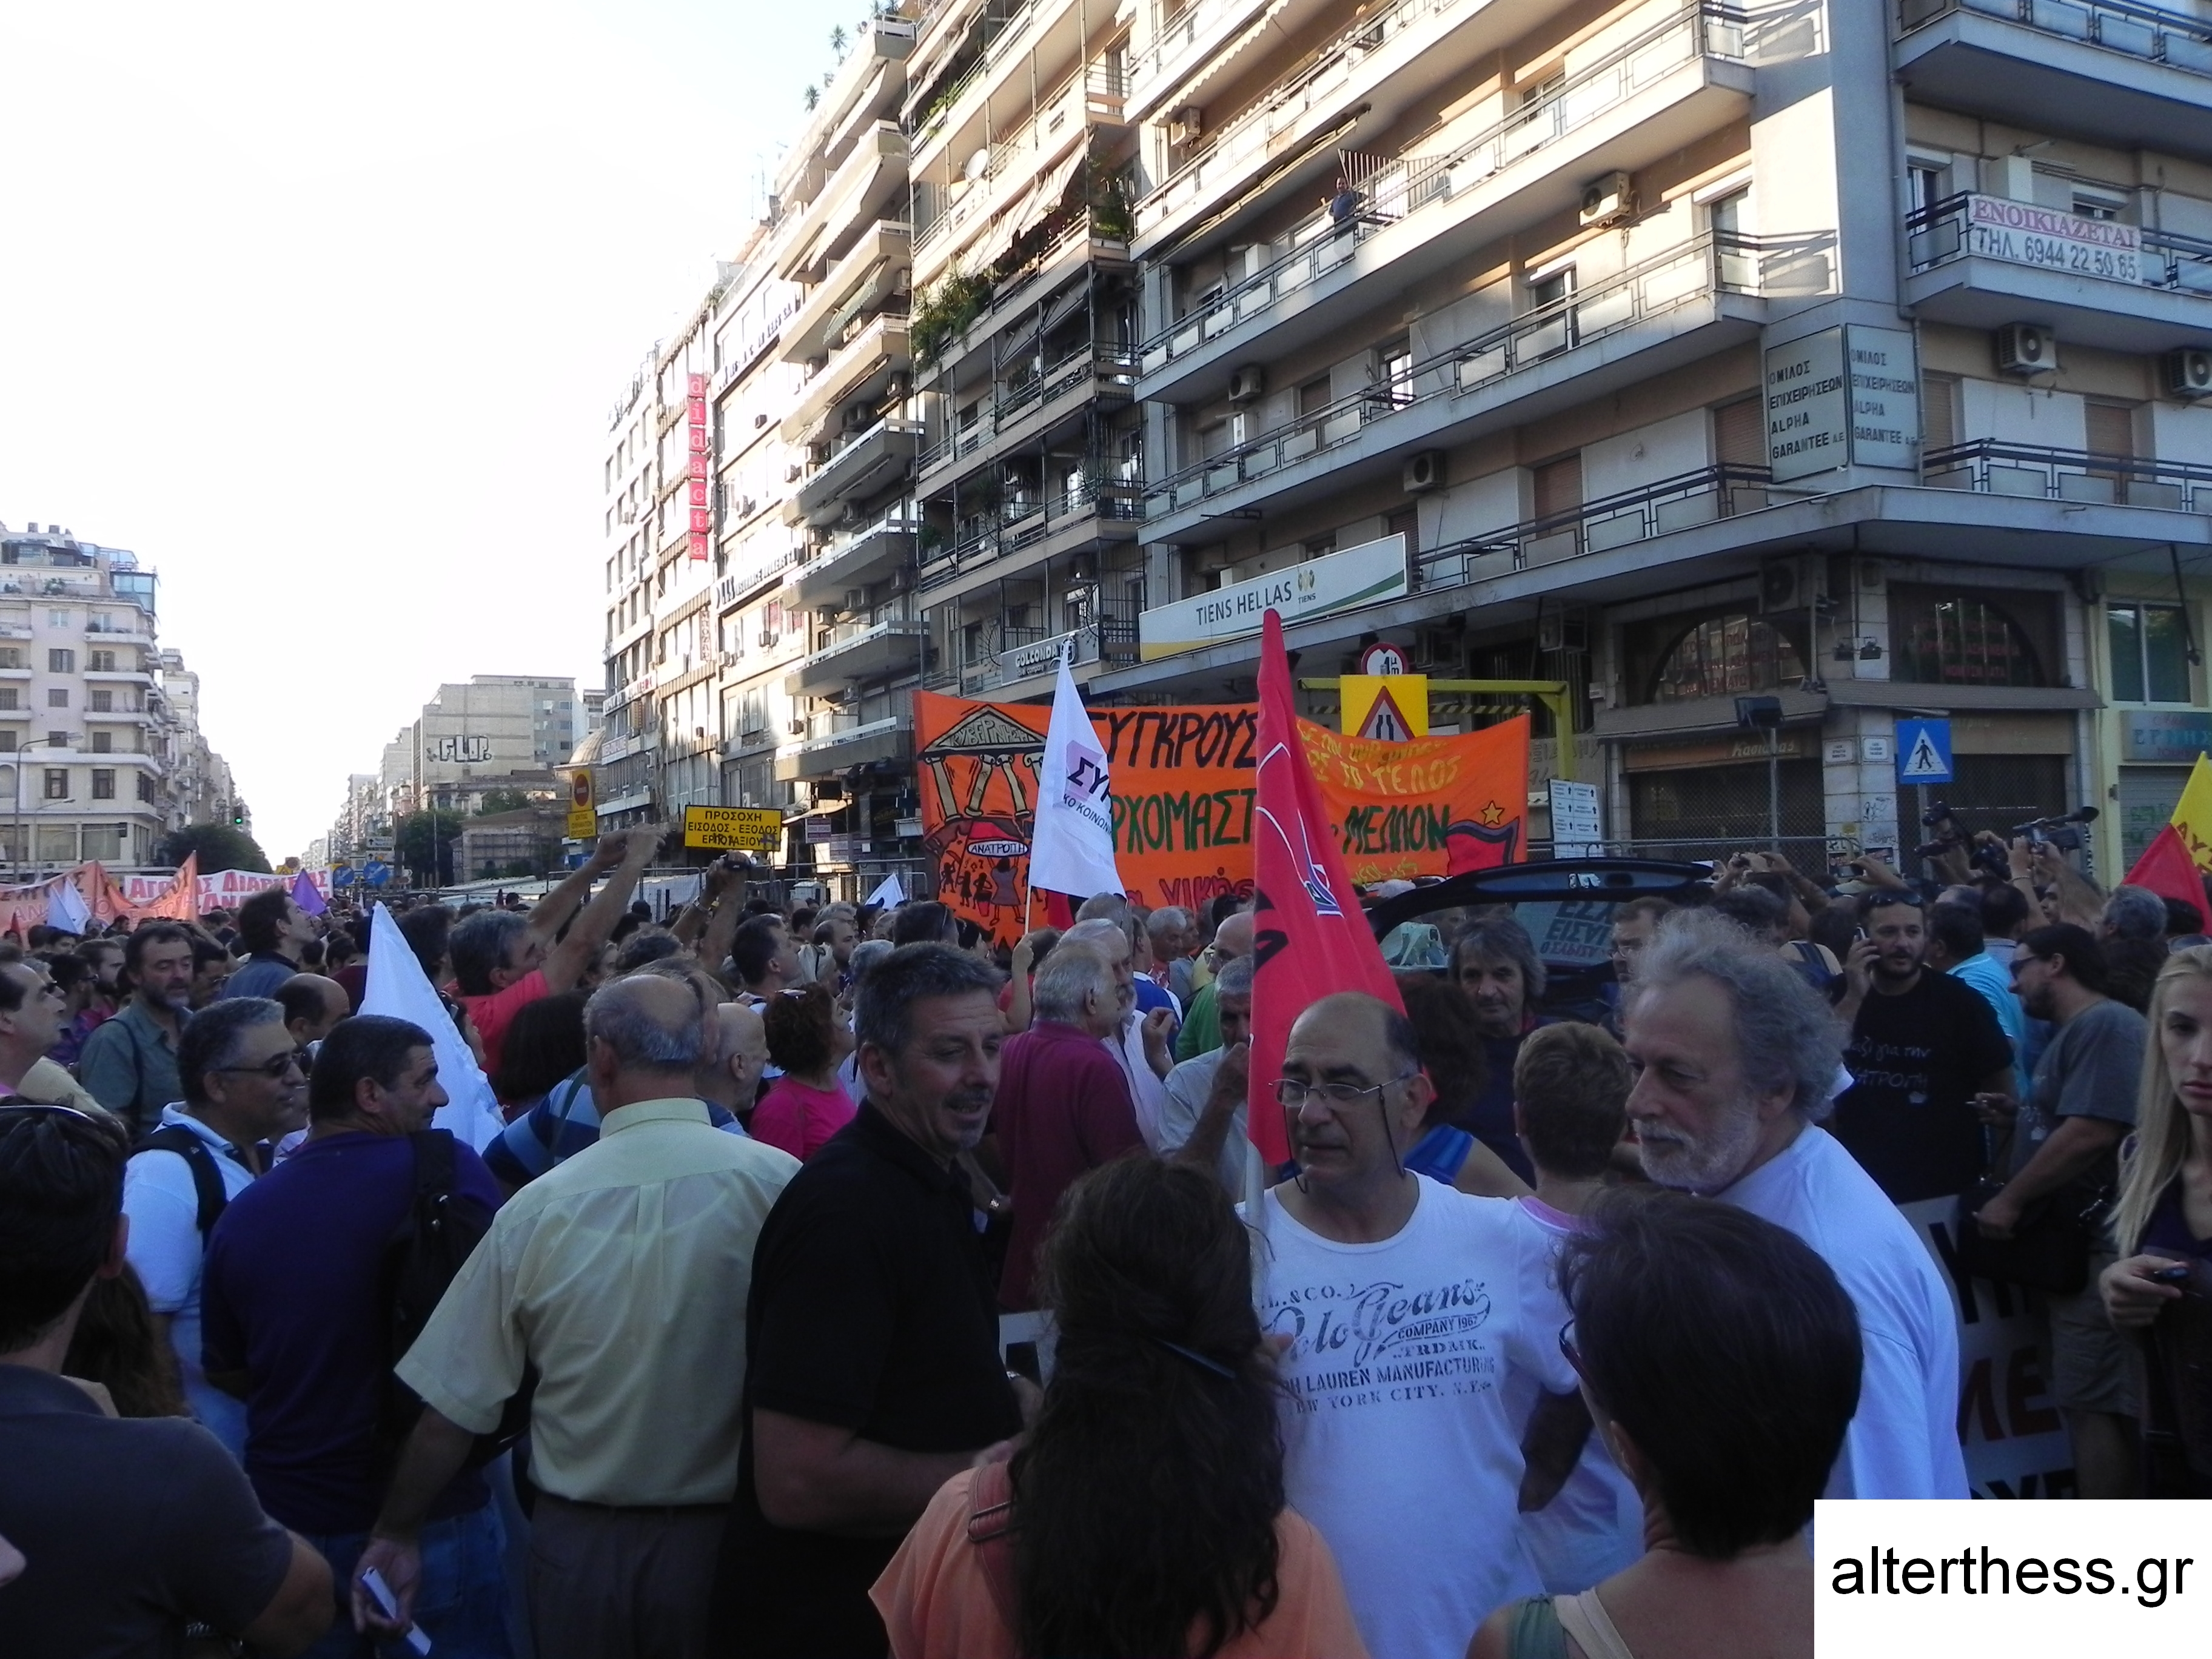 Days of resistance in Thessaloniki, a huge demonstration against austerity